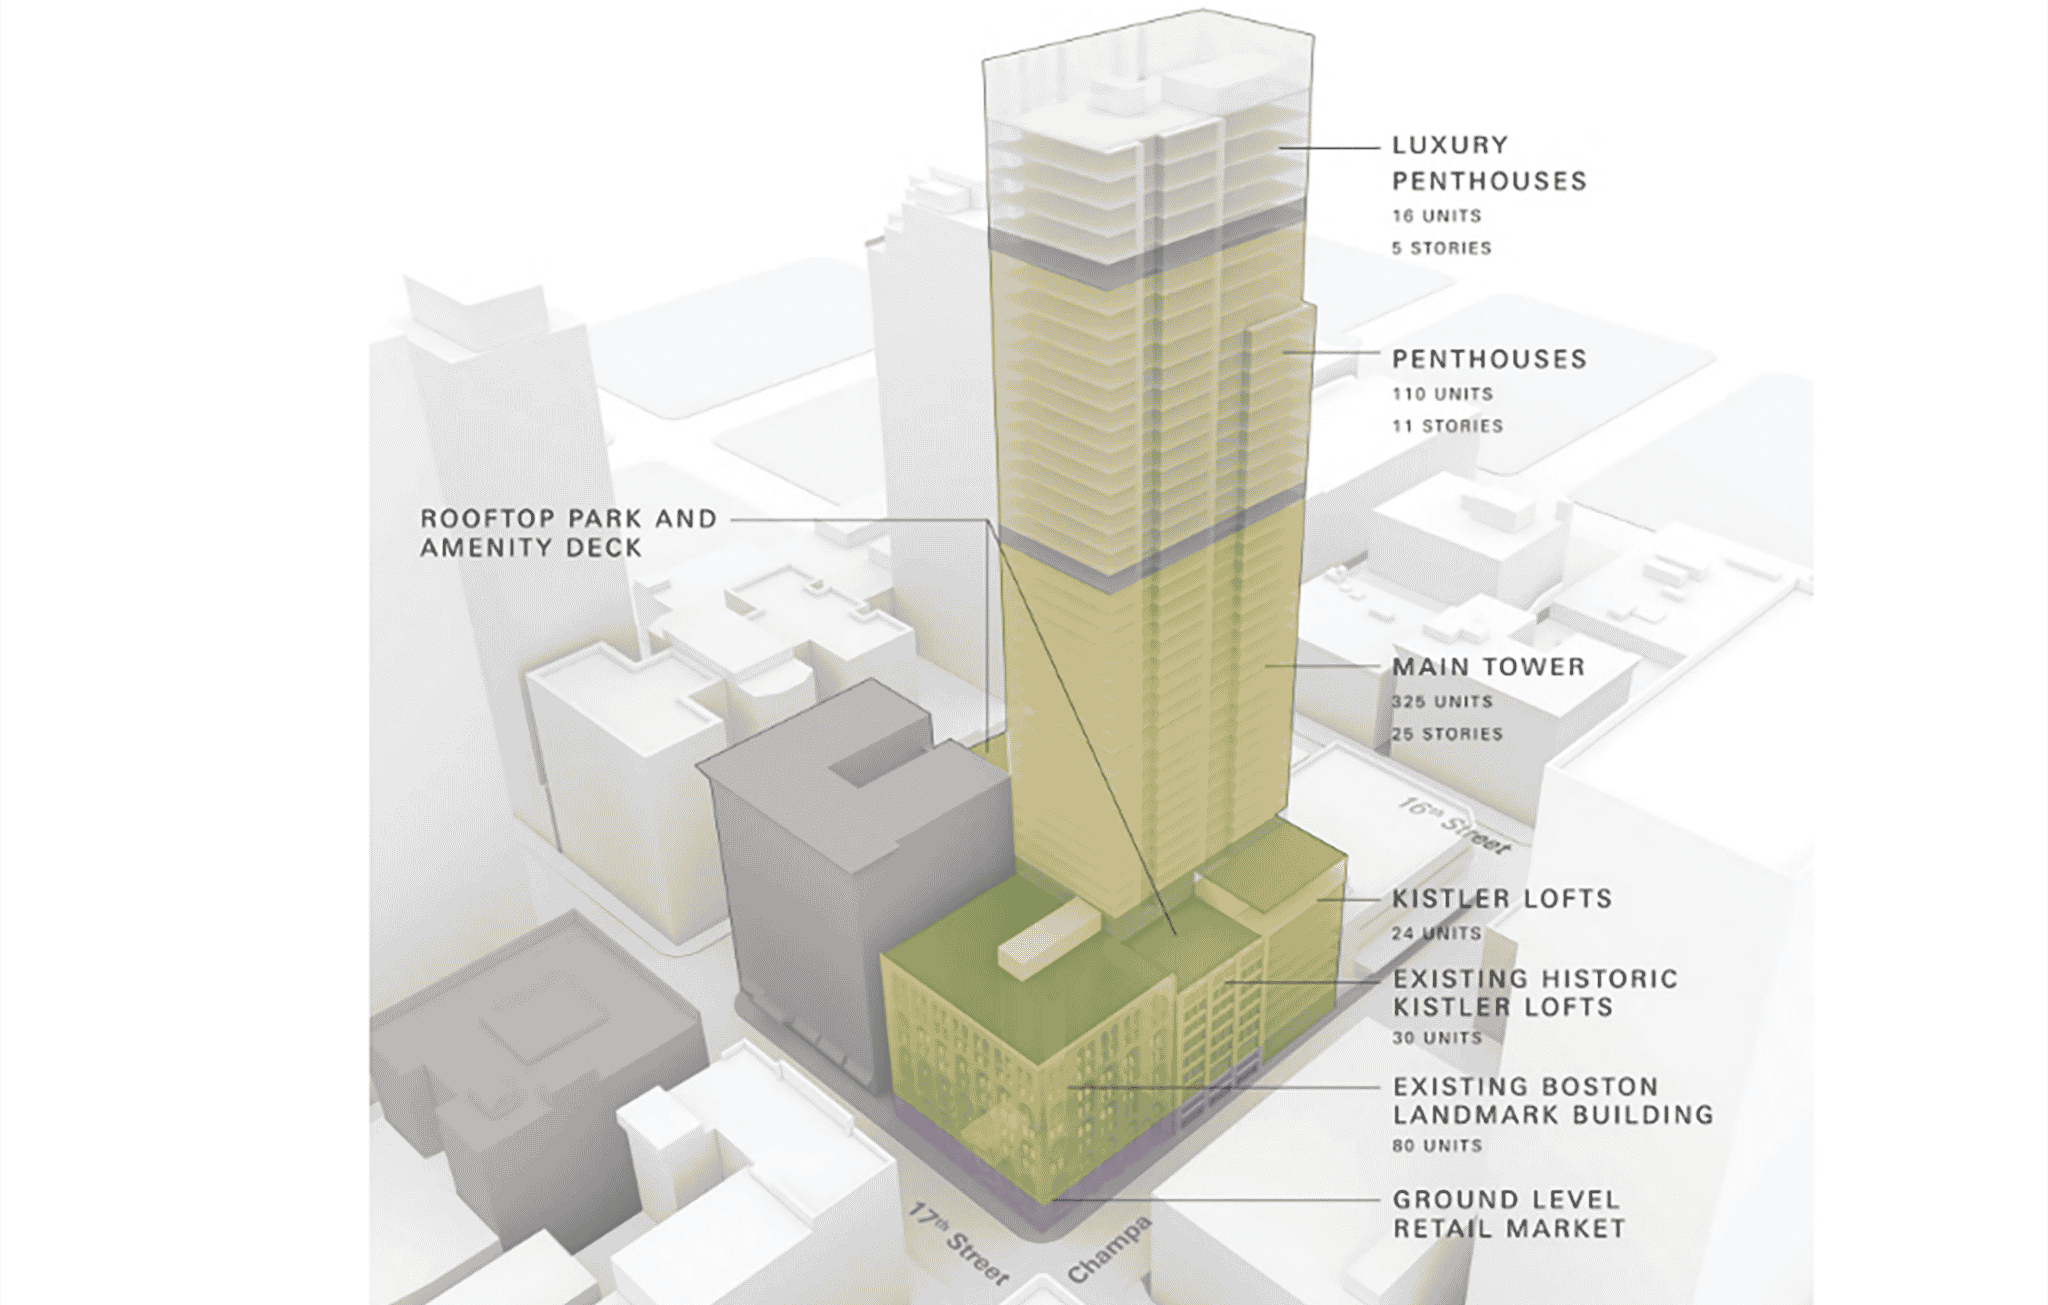 Apartment tower planned for downtown Denver